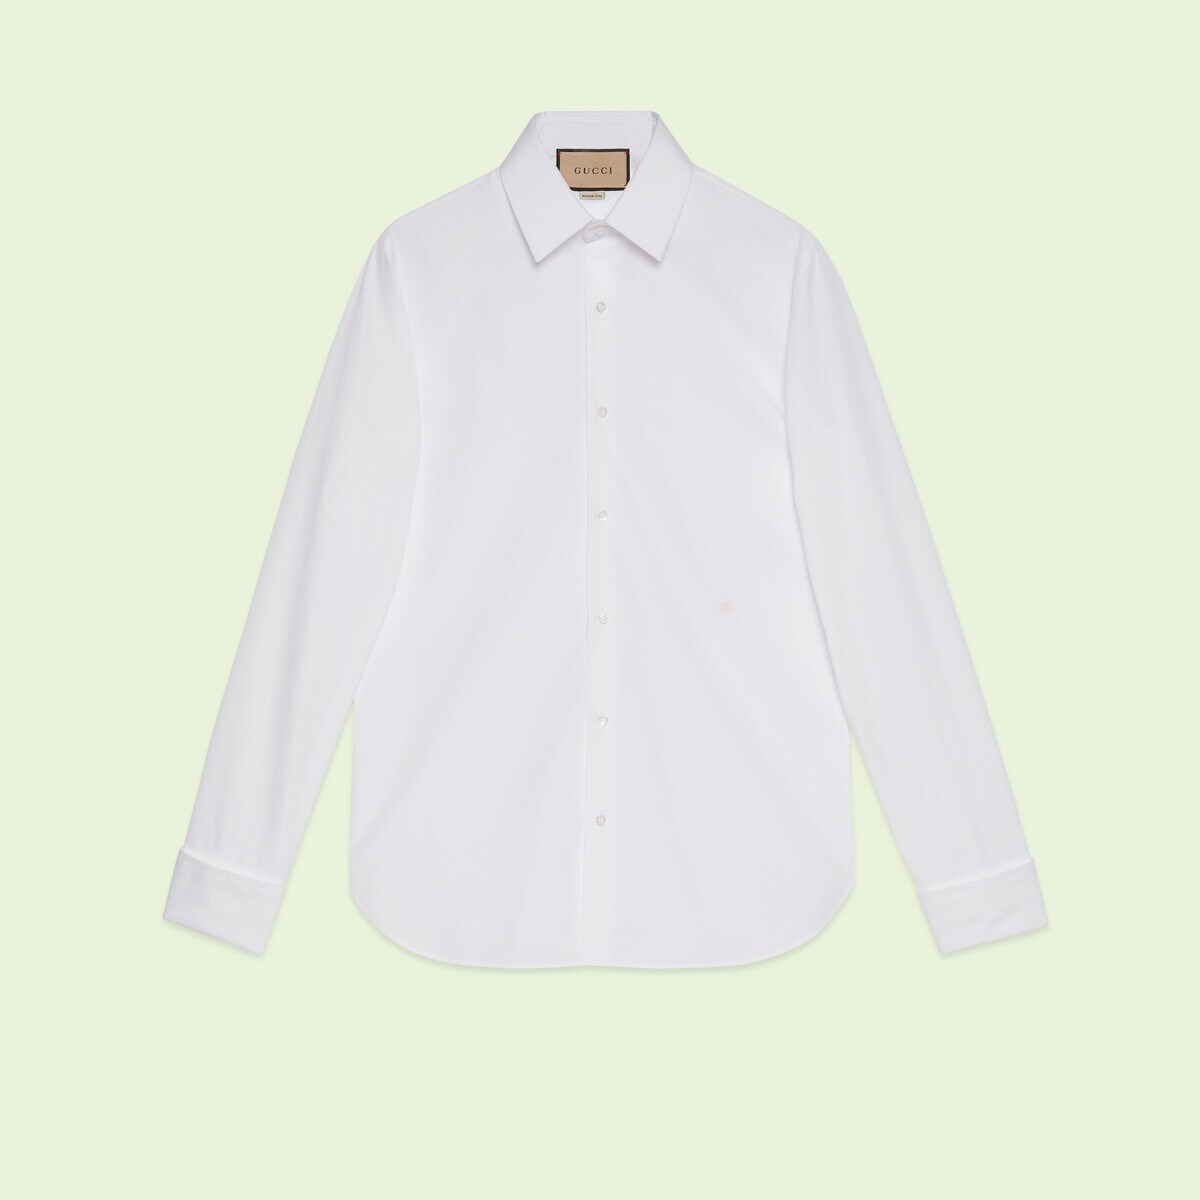 Cotton poplin shirt with Double G - 1